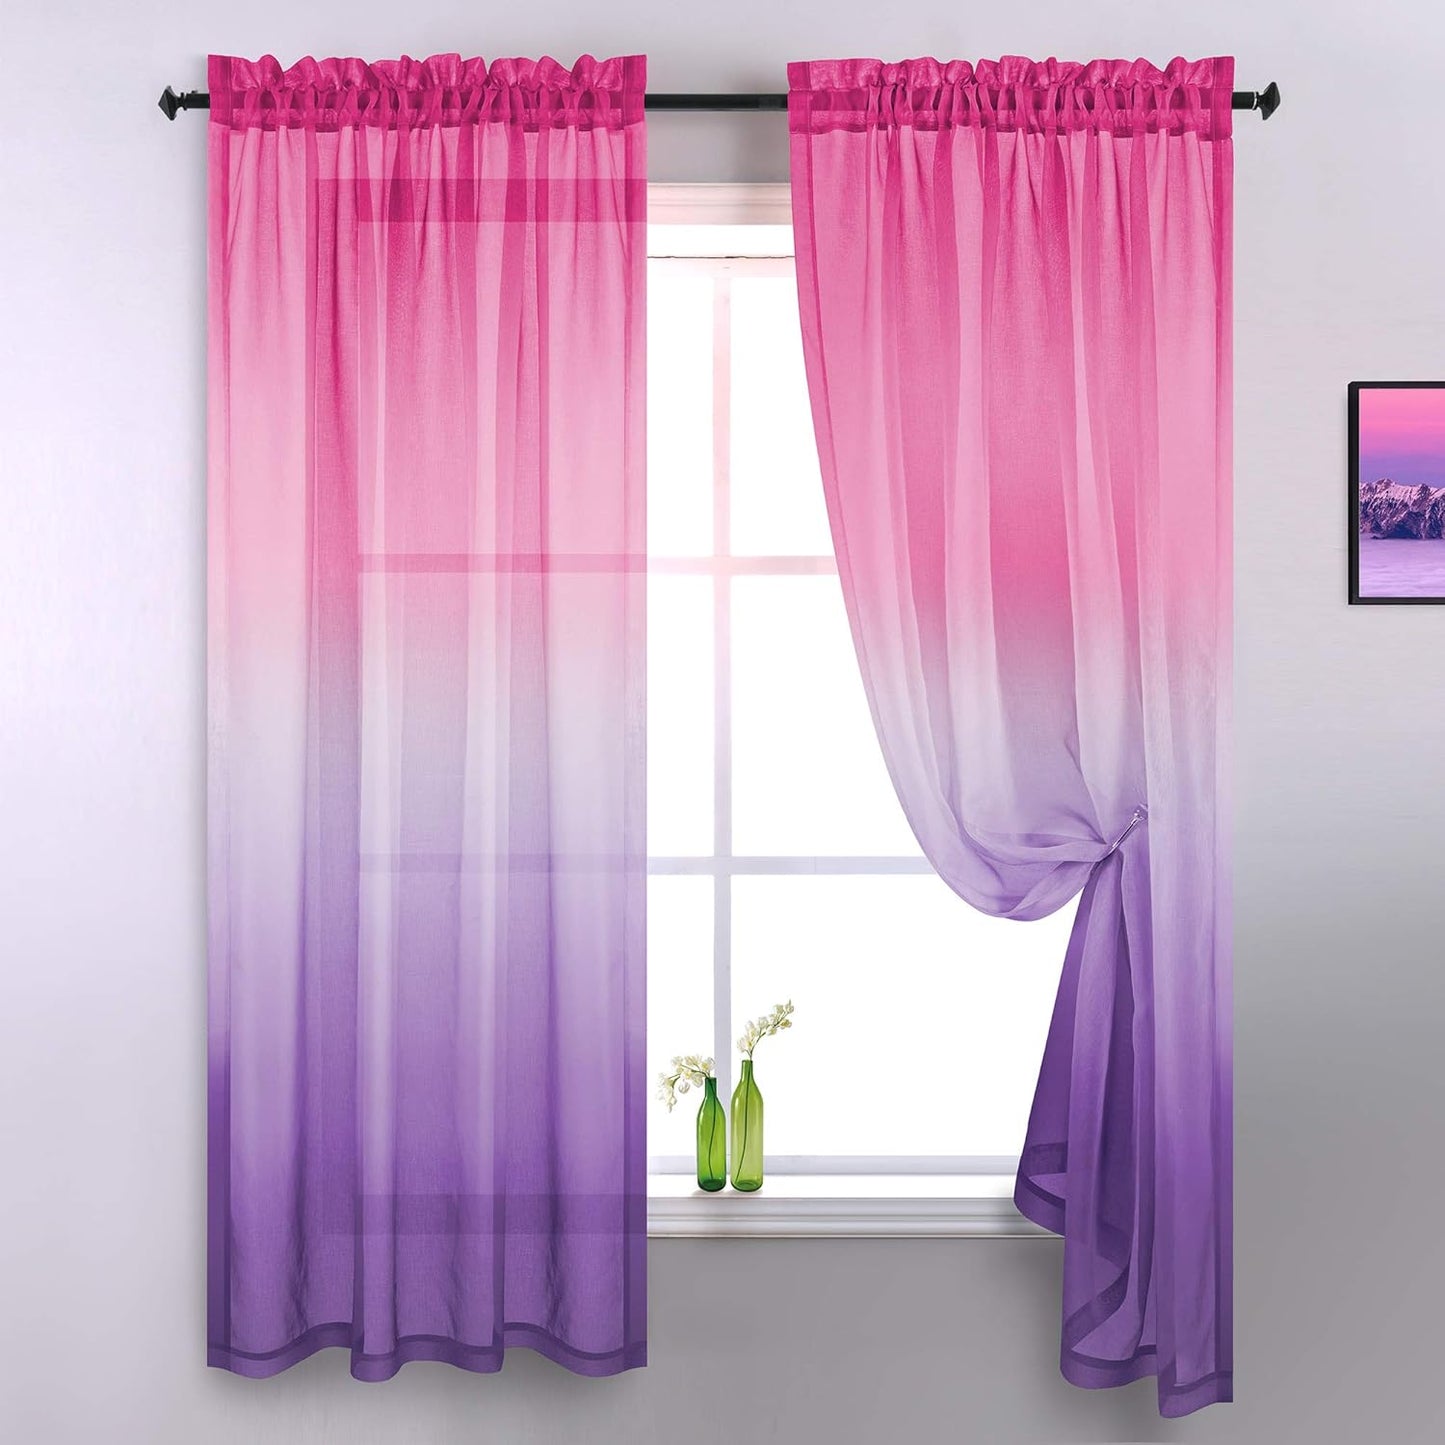 KOUFALL Kids Curtains 2 Panel Set for Bedroom Girls Room Mermaid Decor,Sheer Ombre Baby Curtains for Nursery,Purple and Teal,63 Inch Length  KOUFALL TEXTILE Pink And Purple 52X63 